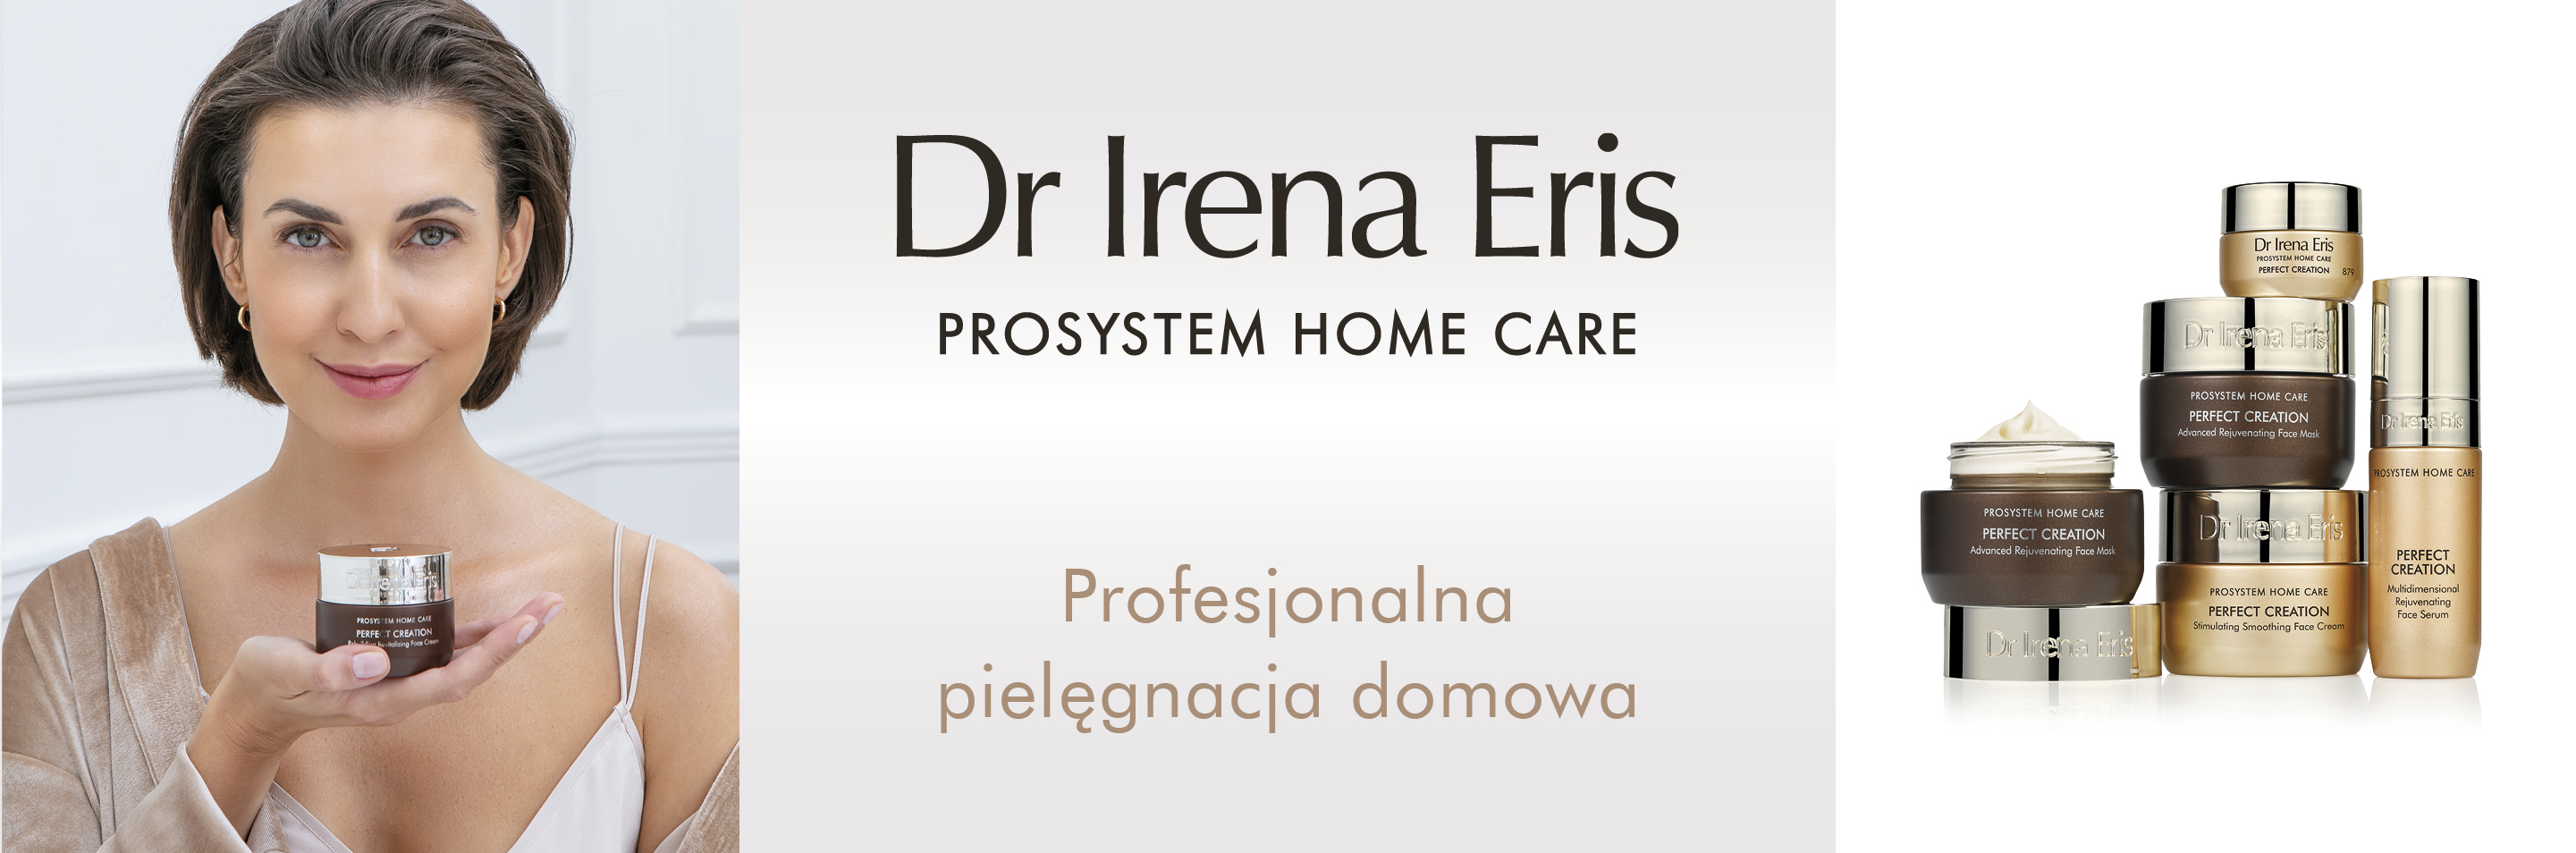 prosystem_home_care